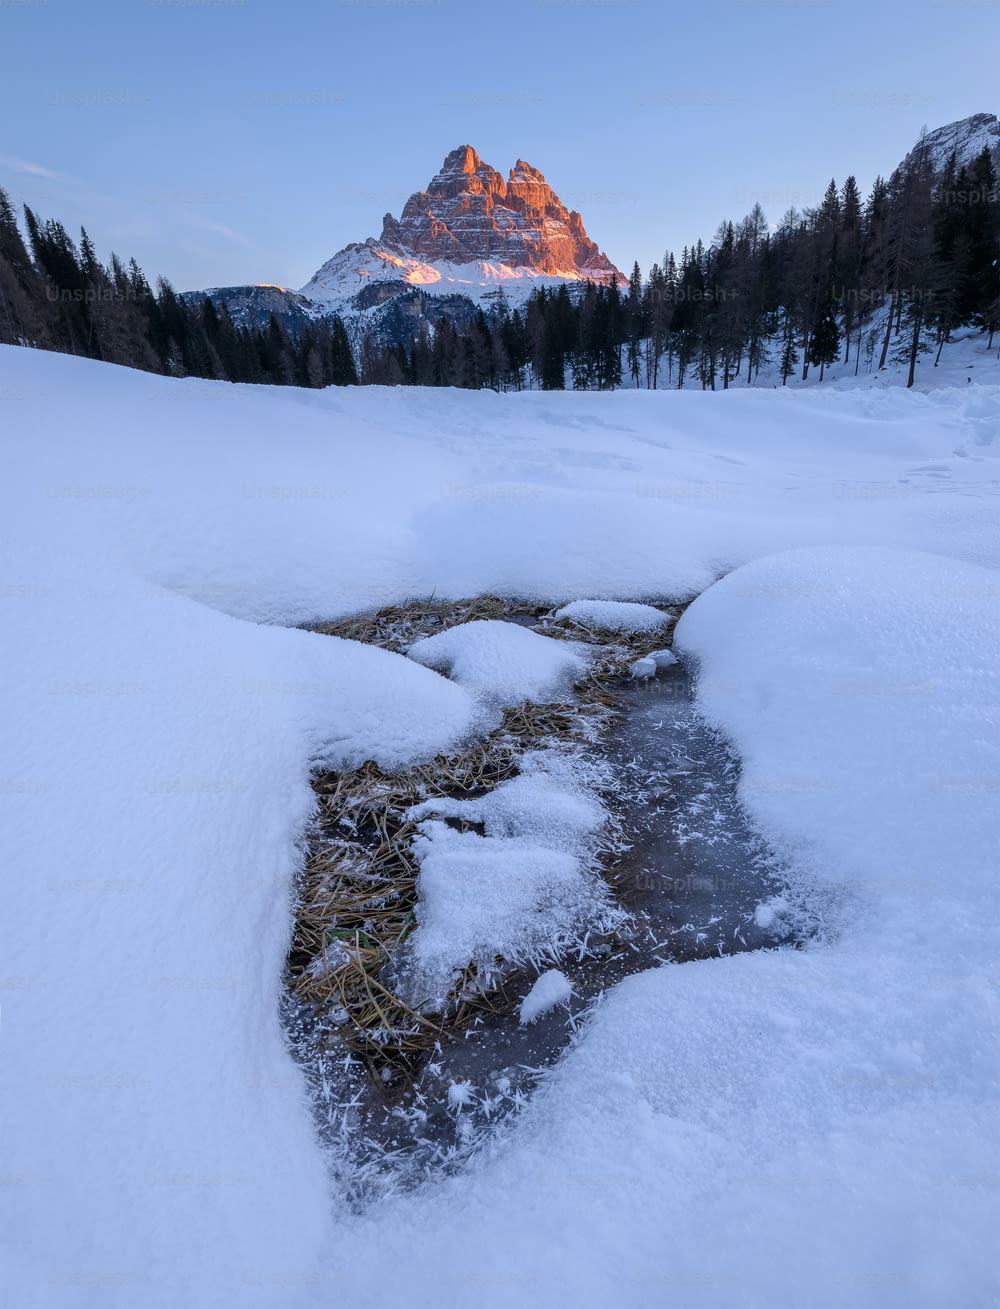 a snowy landscape with a mountain in the background